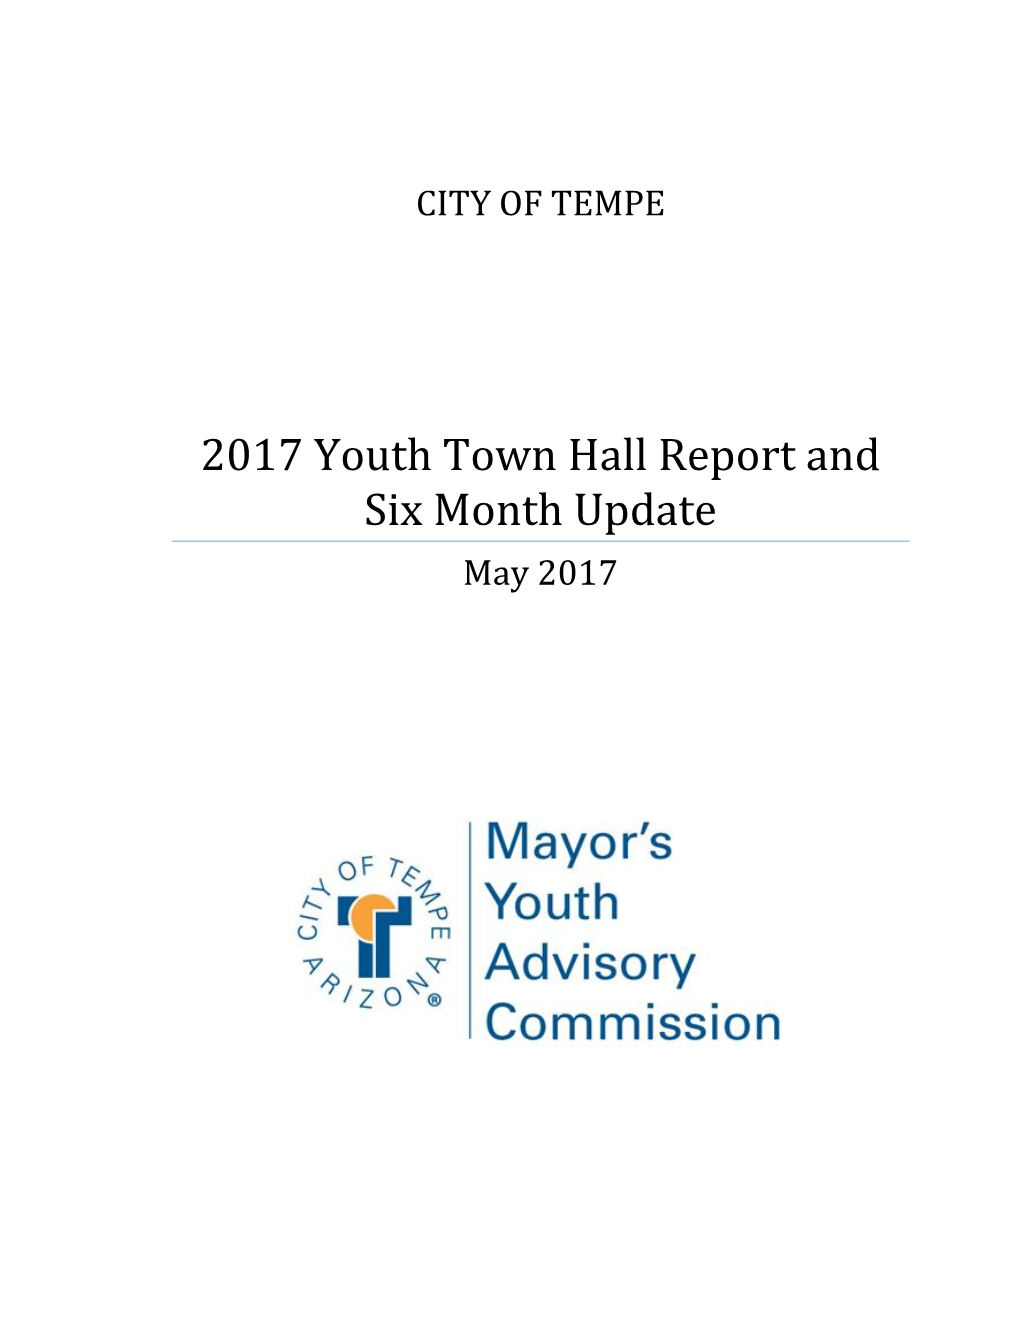 2017 Youth Town Hall Report and Six Month Update May 2017